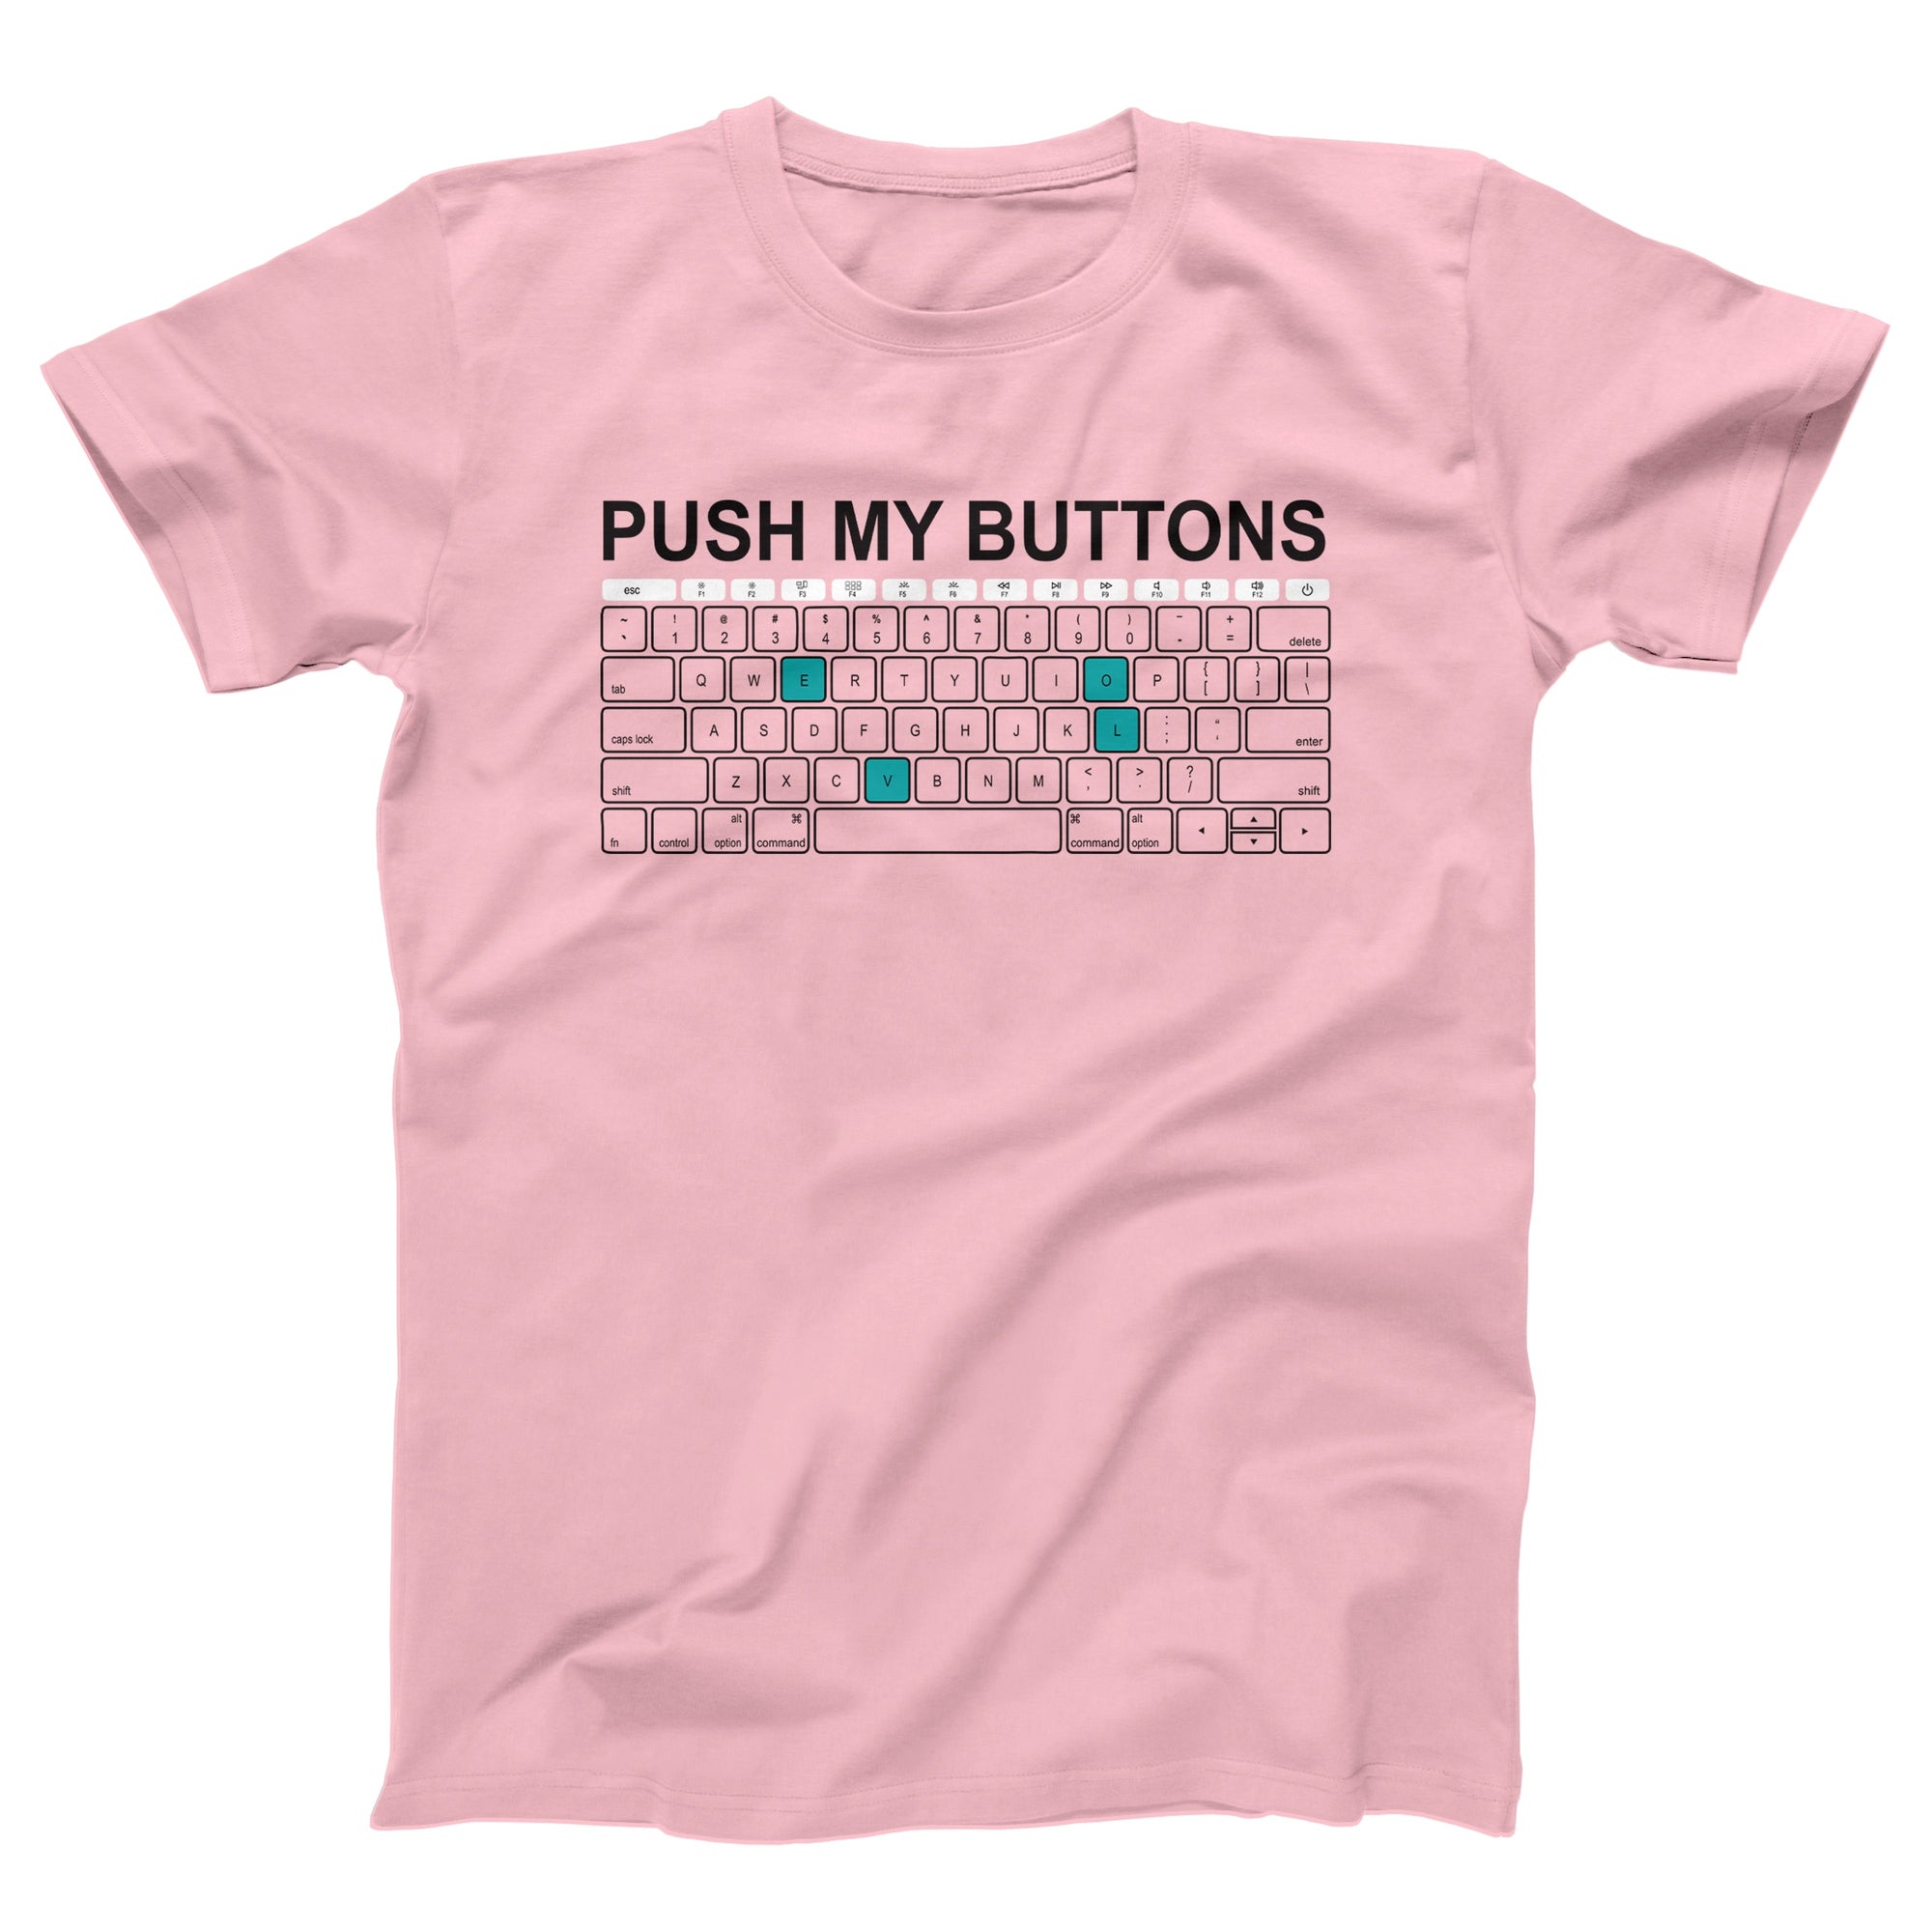 Push My Buttons Adult Unisex T Shirt Funny And Sarcastic T Shirts And Apparel